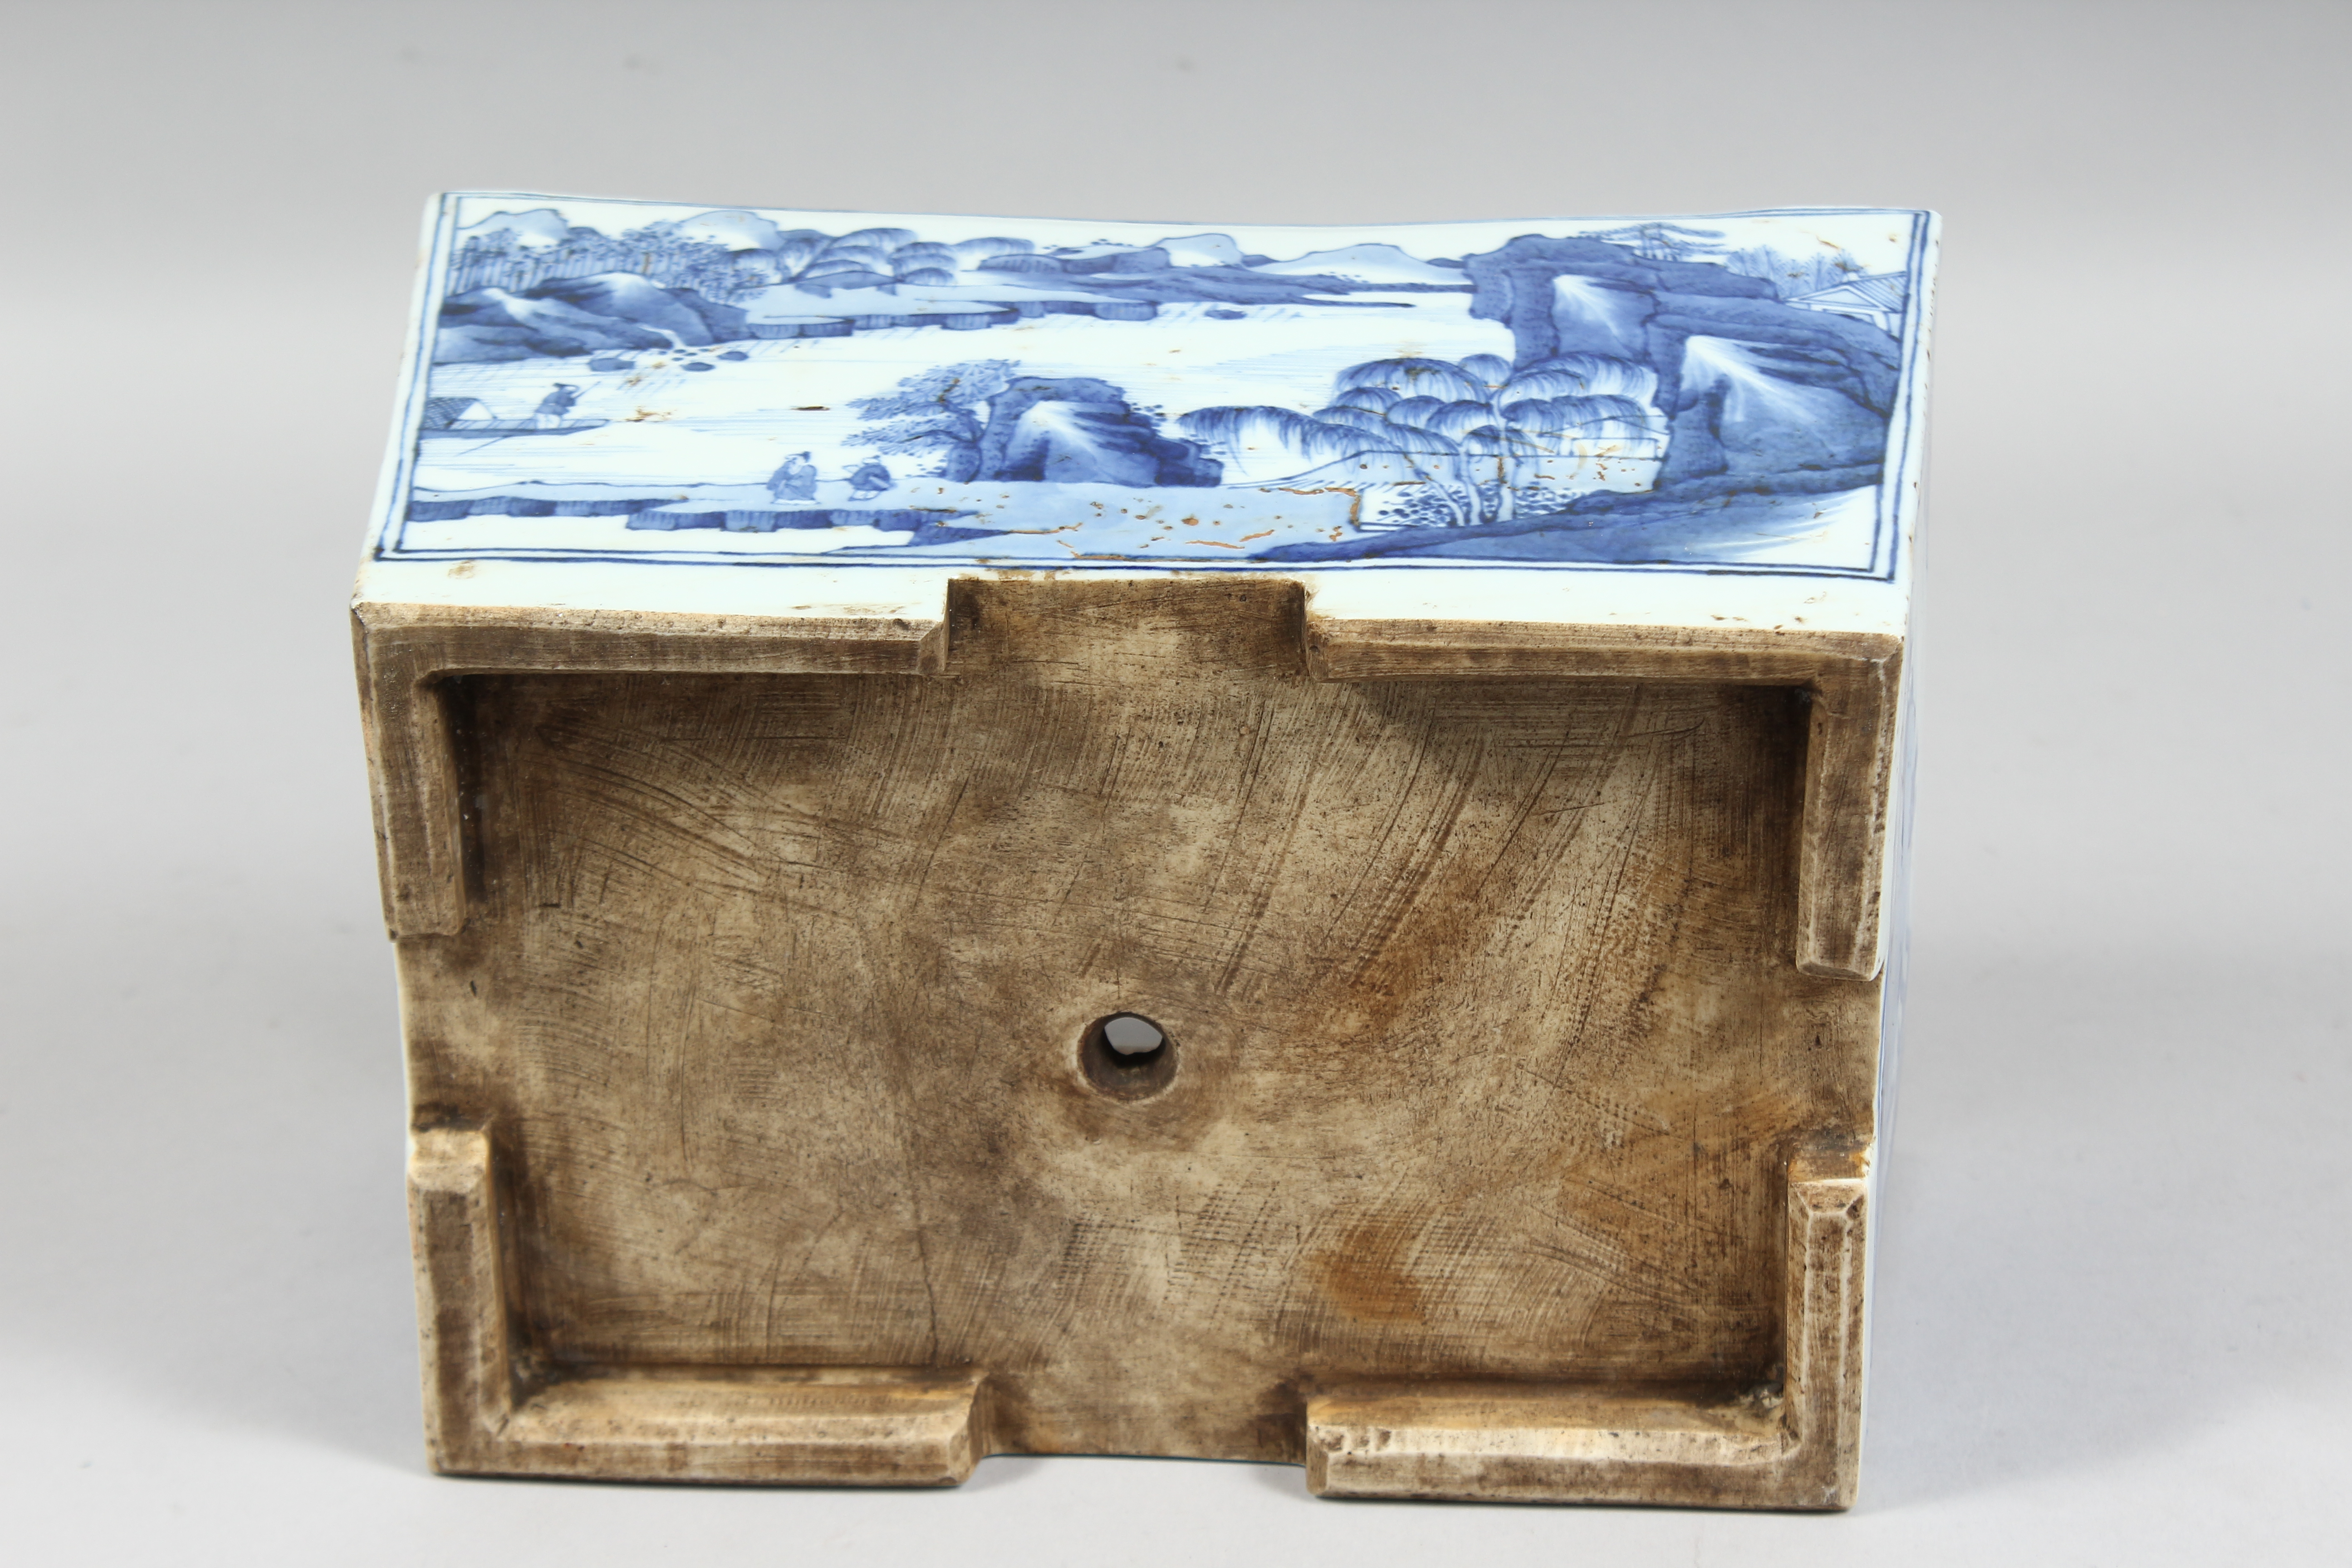 A CHINESE BLUE AND WHITE PORCELAIN RECTANGULAR PLANTER, each side depicting landscape scenes with - Image 6 of 6